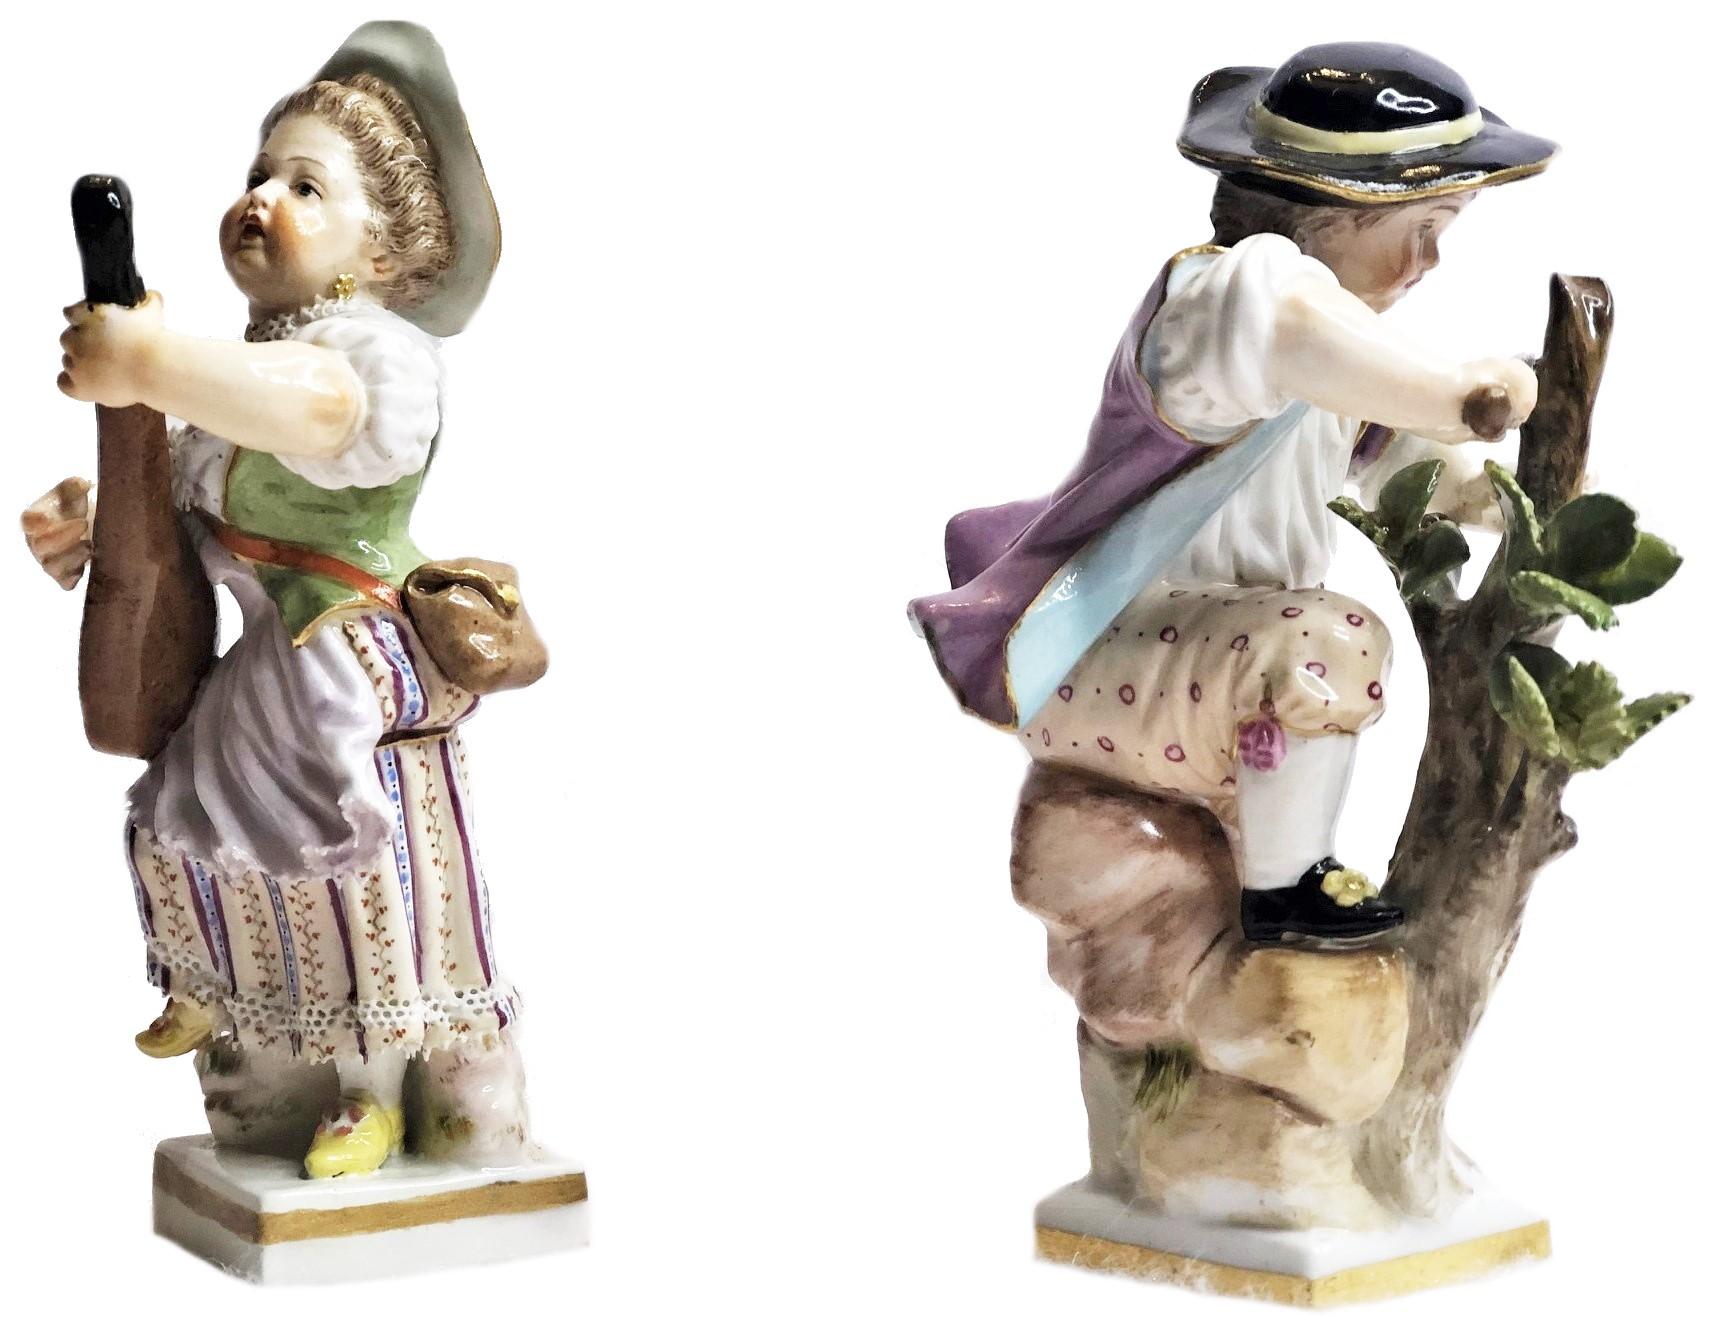 Executed in the best traditions of Meissen, this lovely pair of statuettes depicts a female mandolin player and a woodcutter, where a musician entertains the laborer while he is occupied with his work. 

Hallmarked with Meissen crossed swords and